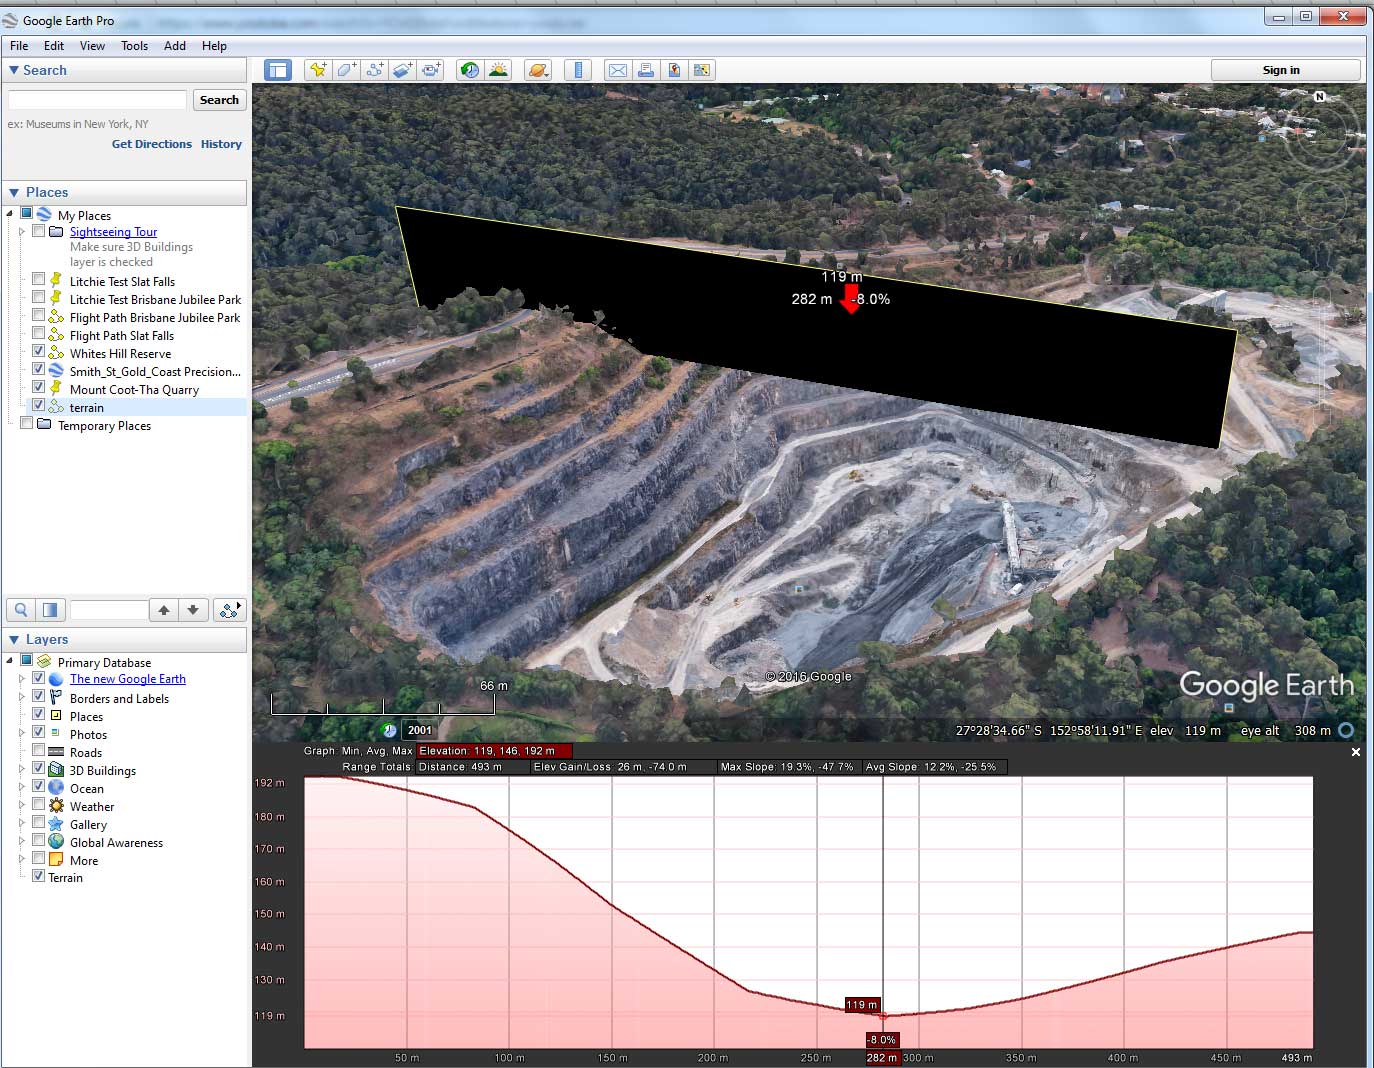 Geospatial Drone Mapping using Consumer Drones - Mount Coot-That terrain elevation profile for drone mapping